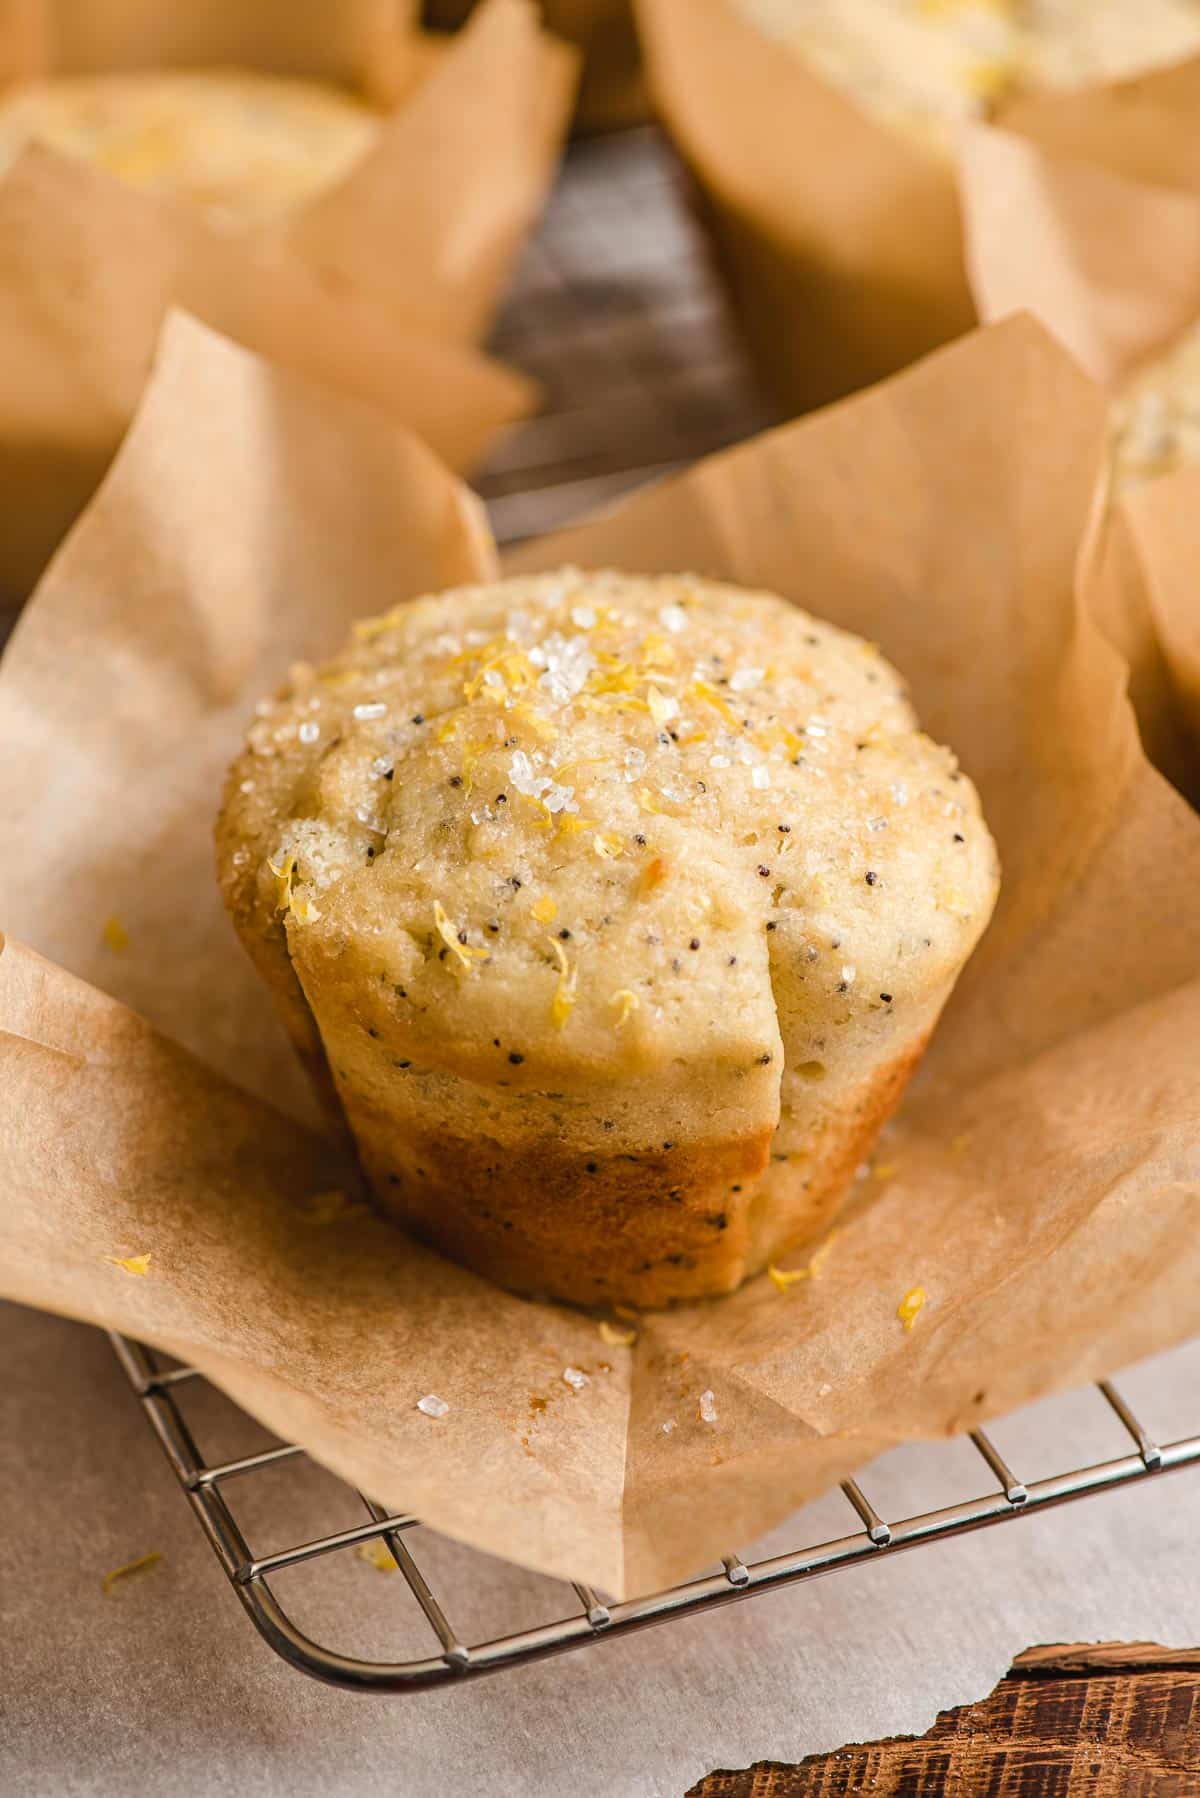 Lemon Raspberry Jam Muffin shown in a parchment paper wrapper.